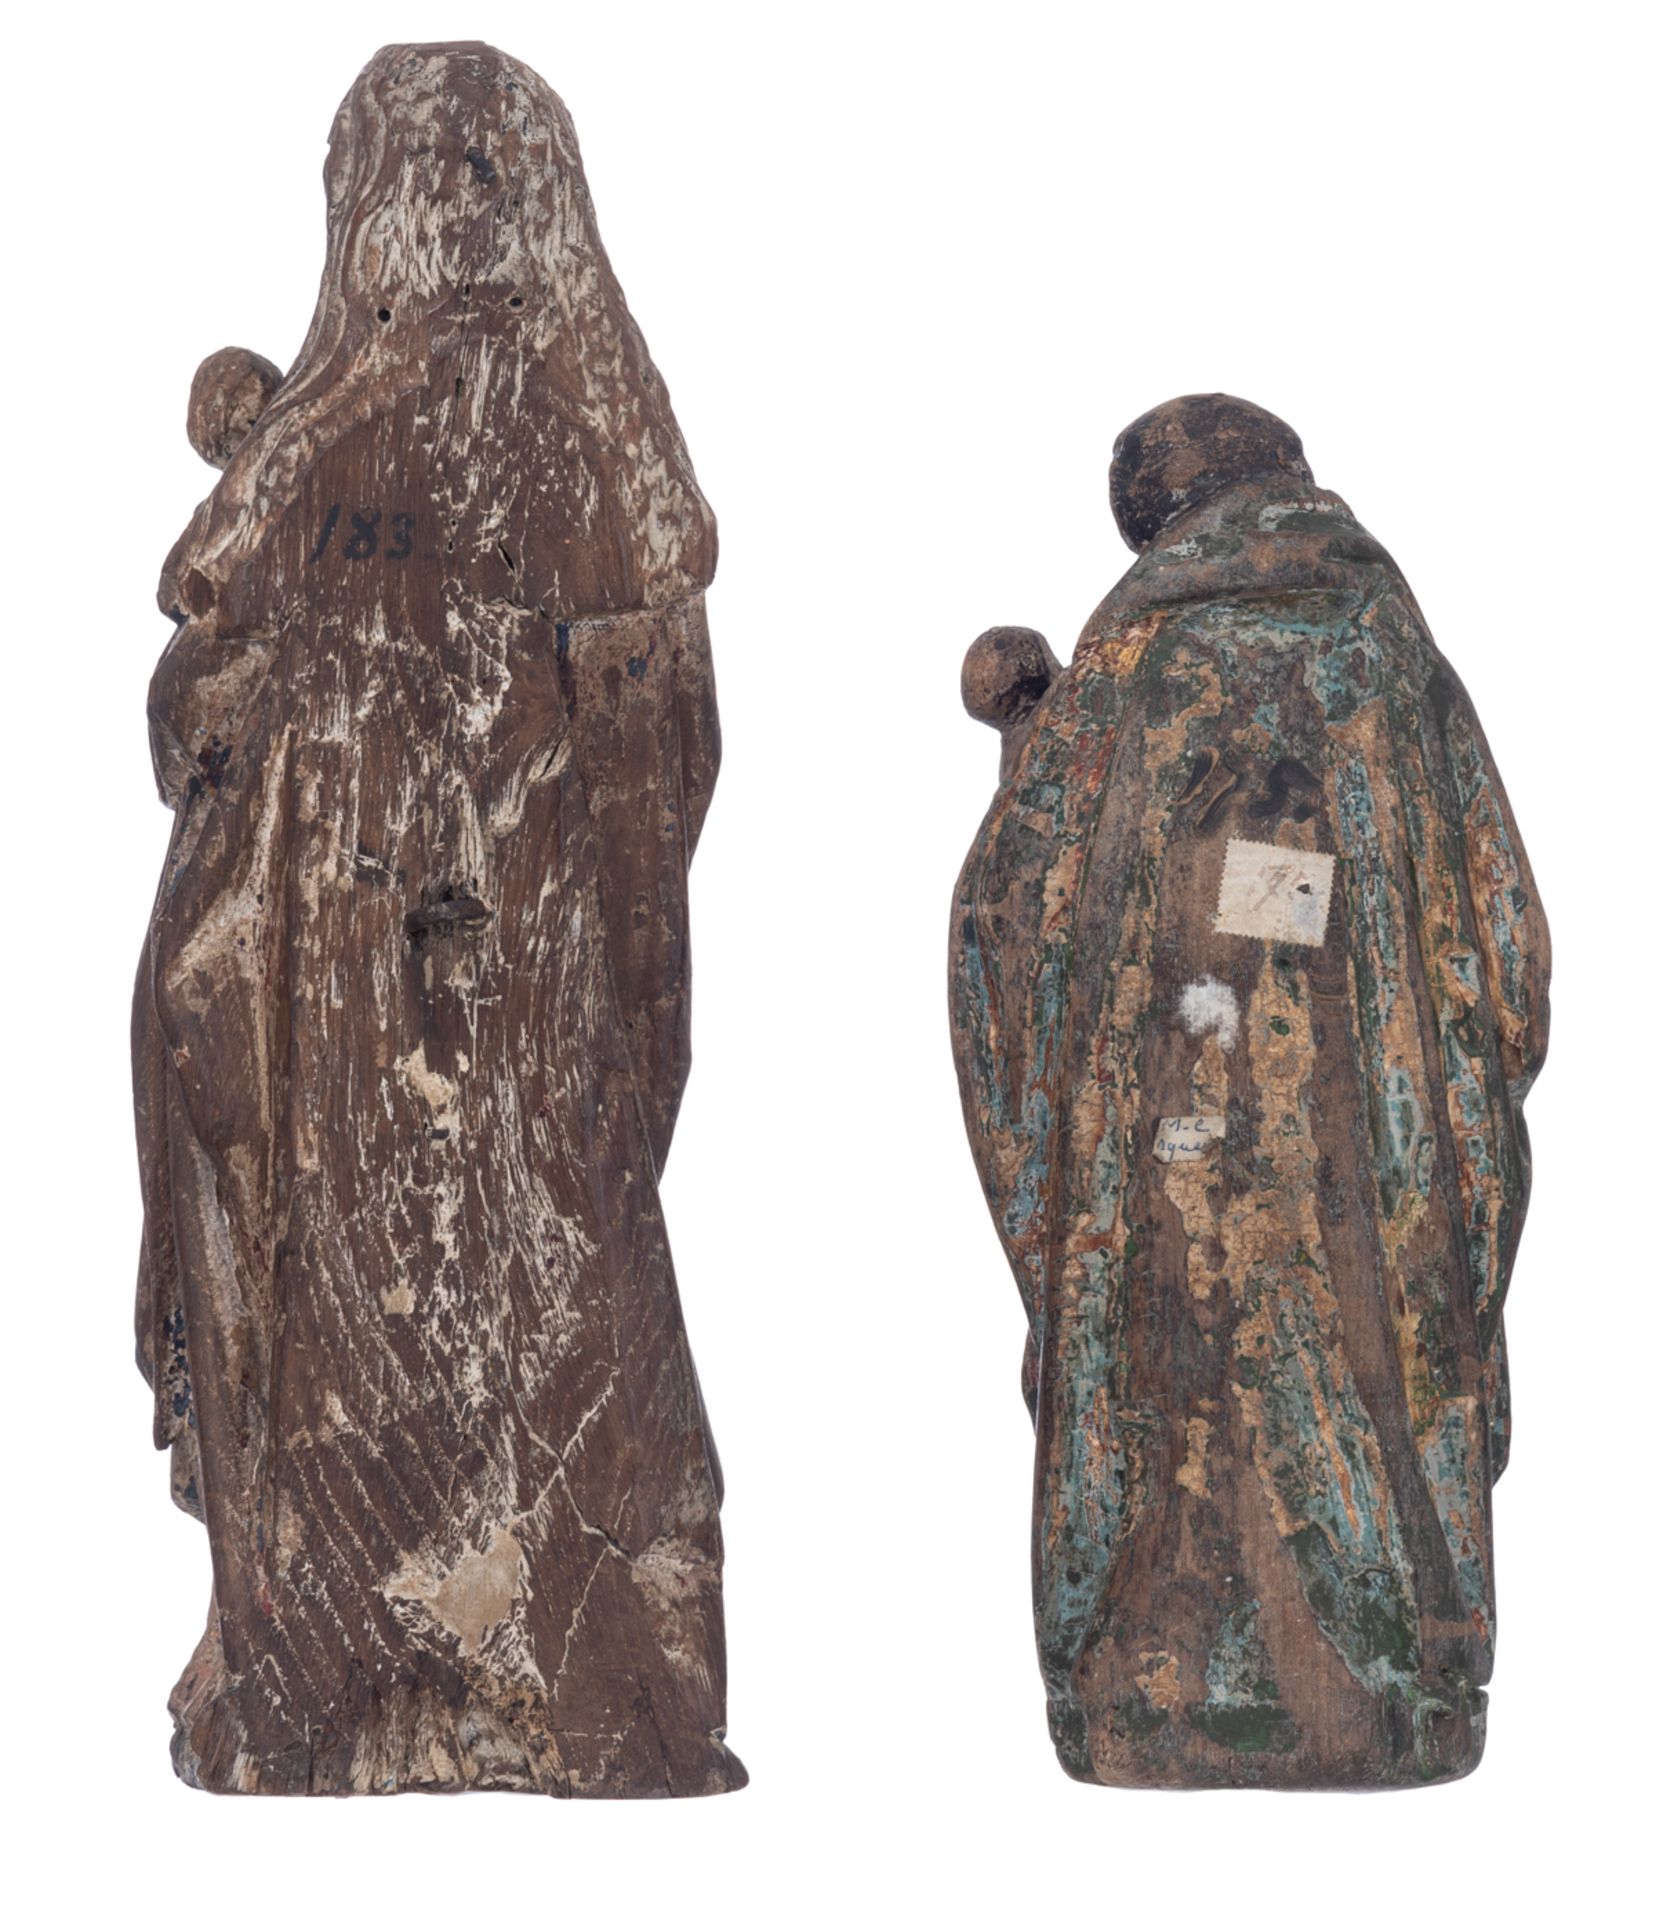 A 16th/17thC oak sculpture with traces of polychrome paint representing the Nursing Madonna, Souther - Bild 3 aus 7